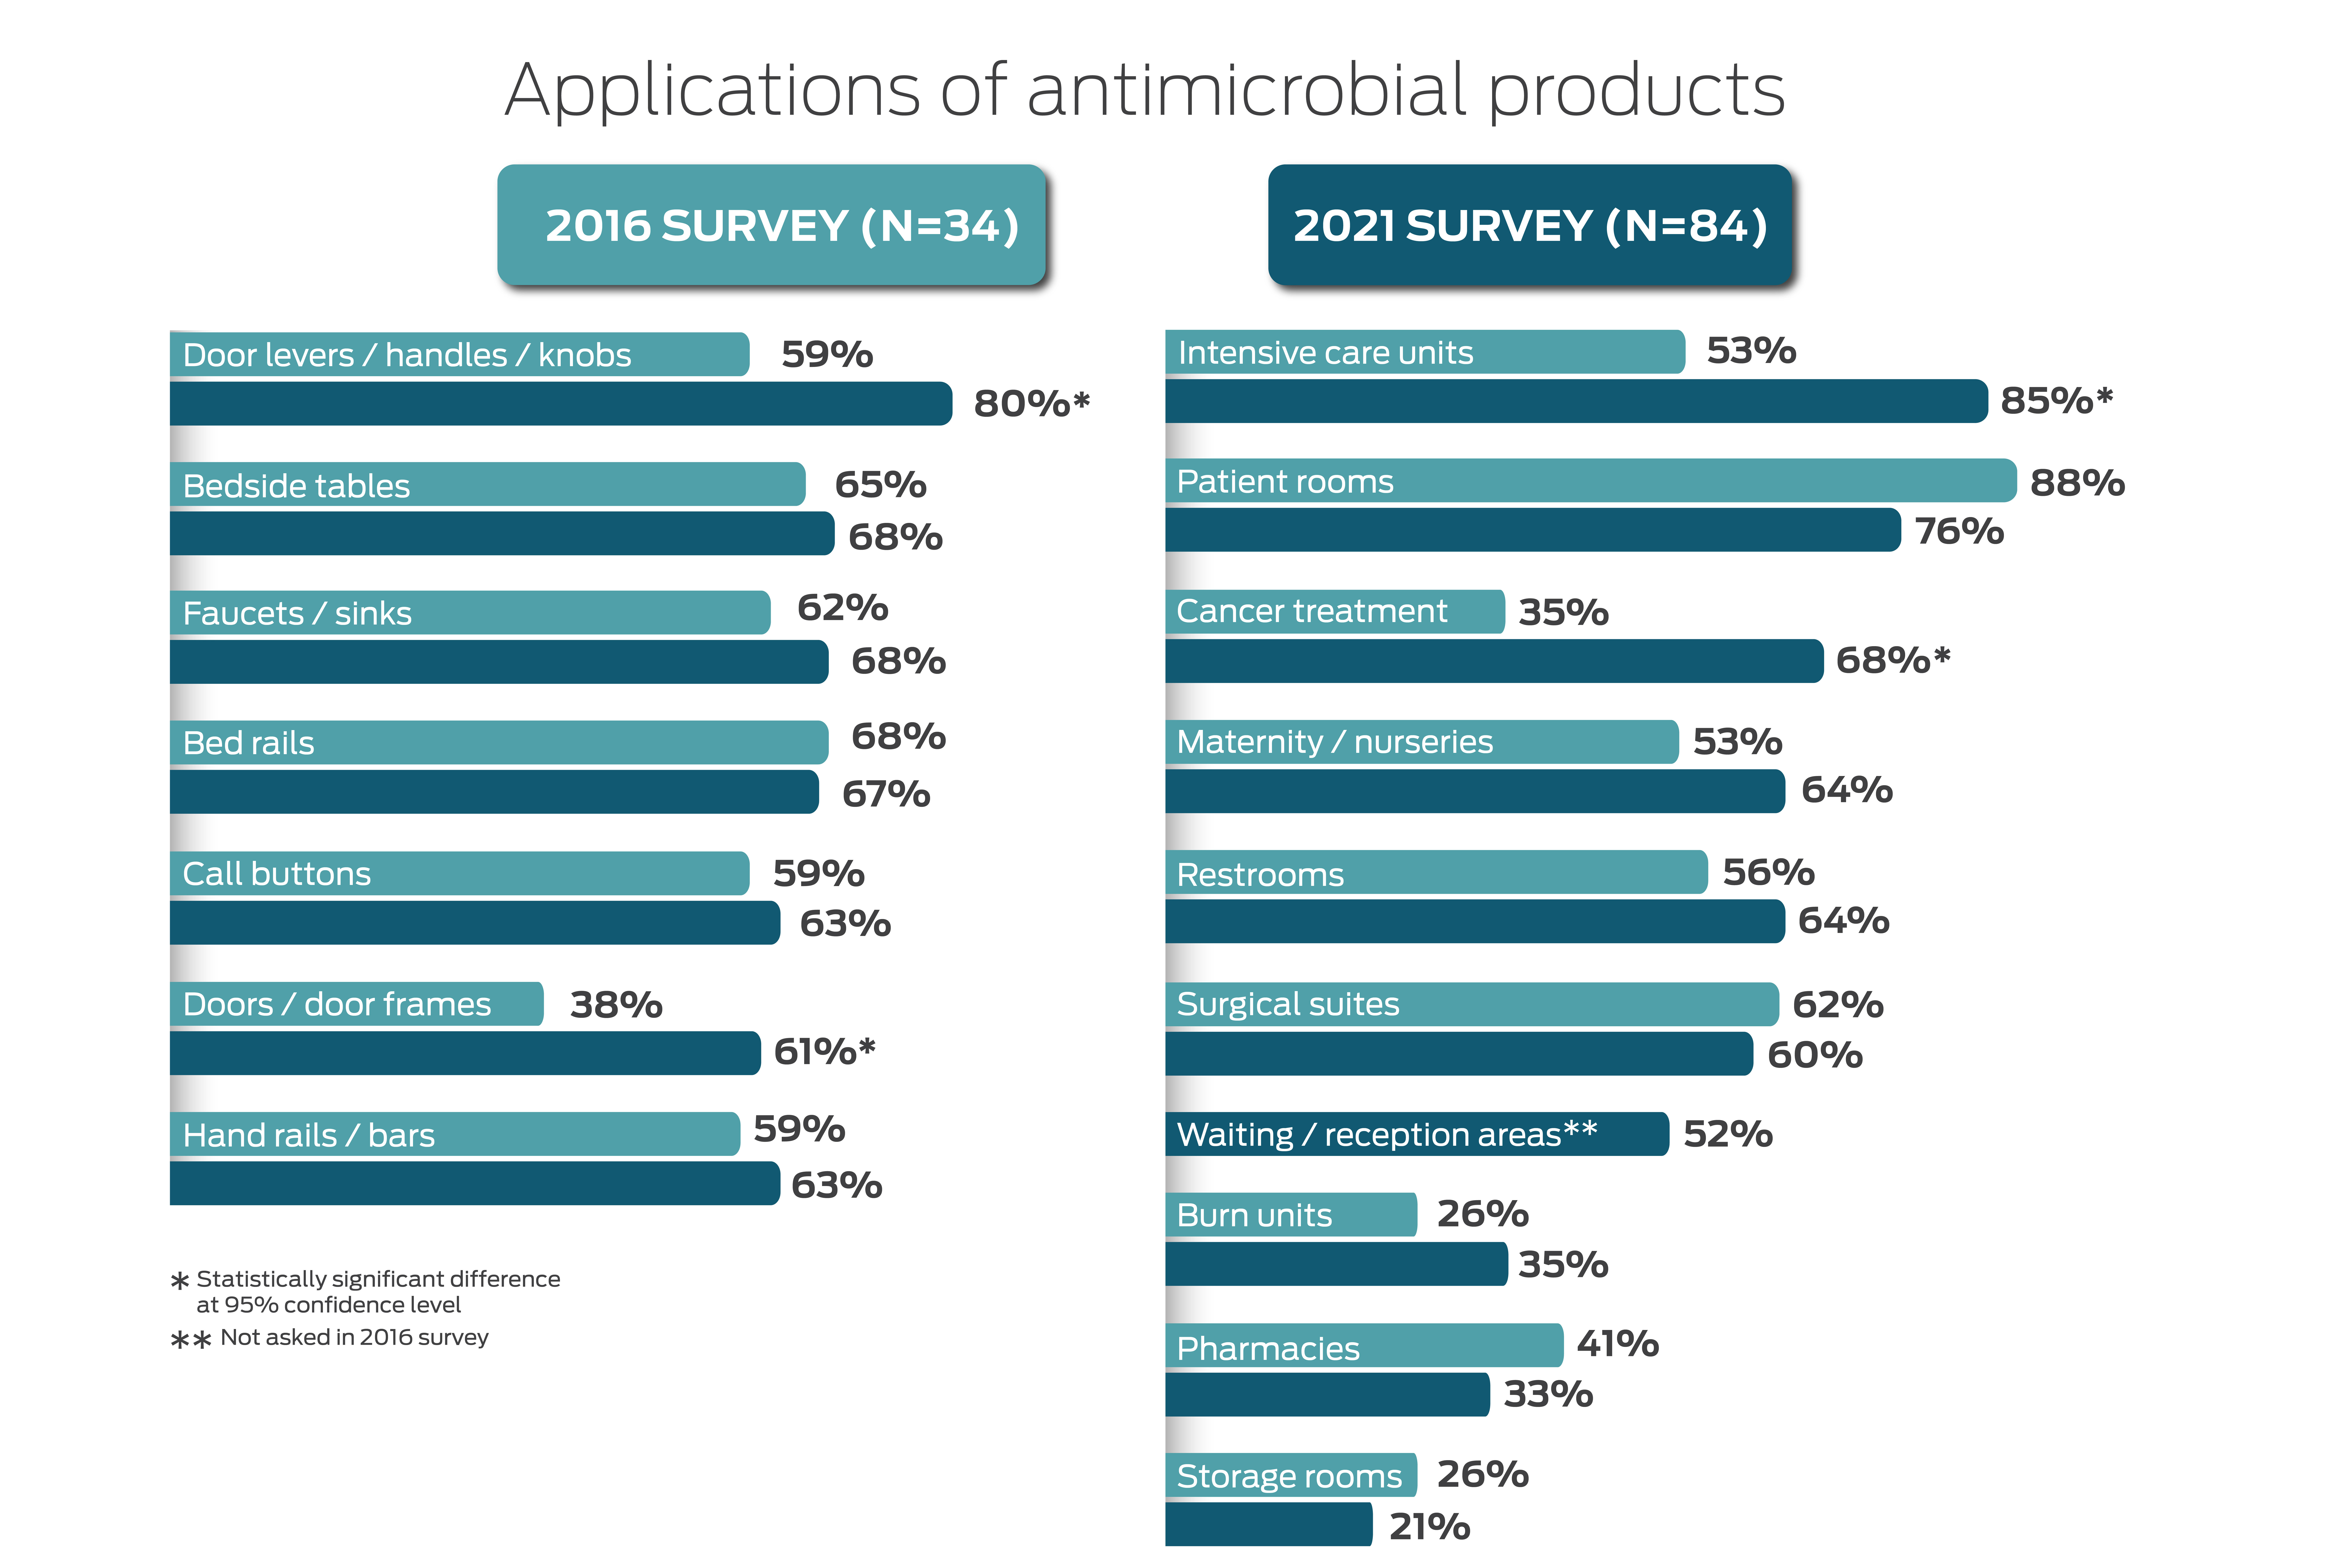 health care trends and changes - antimicrobial products